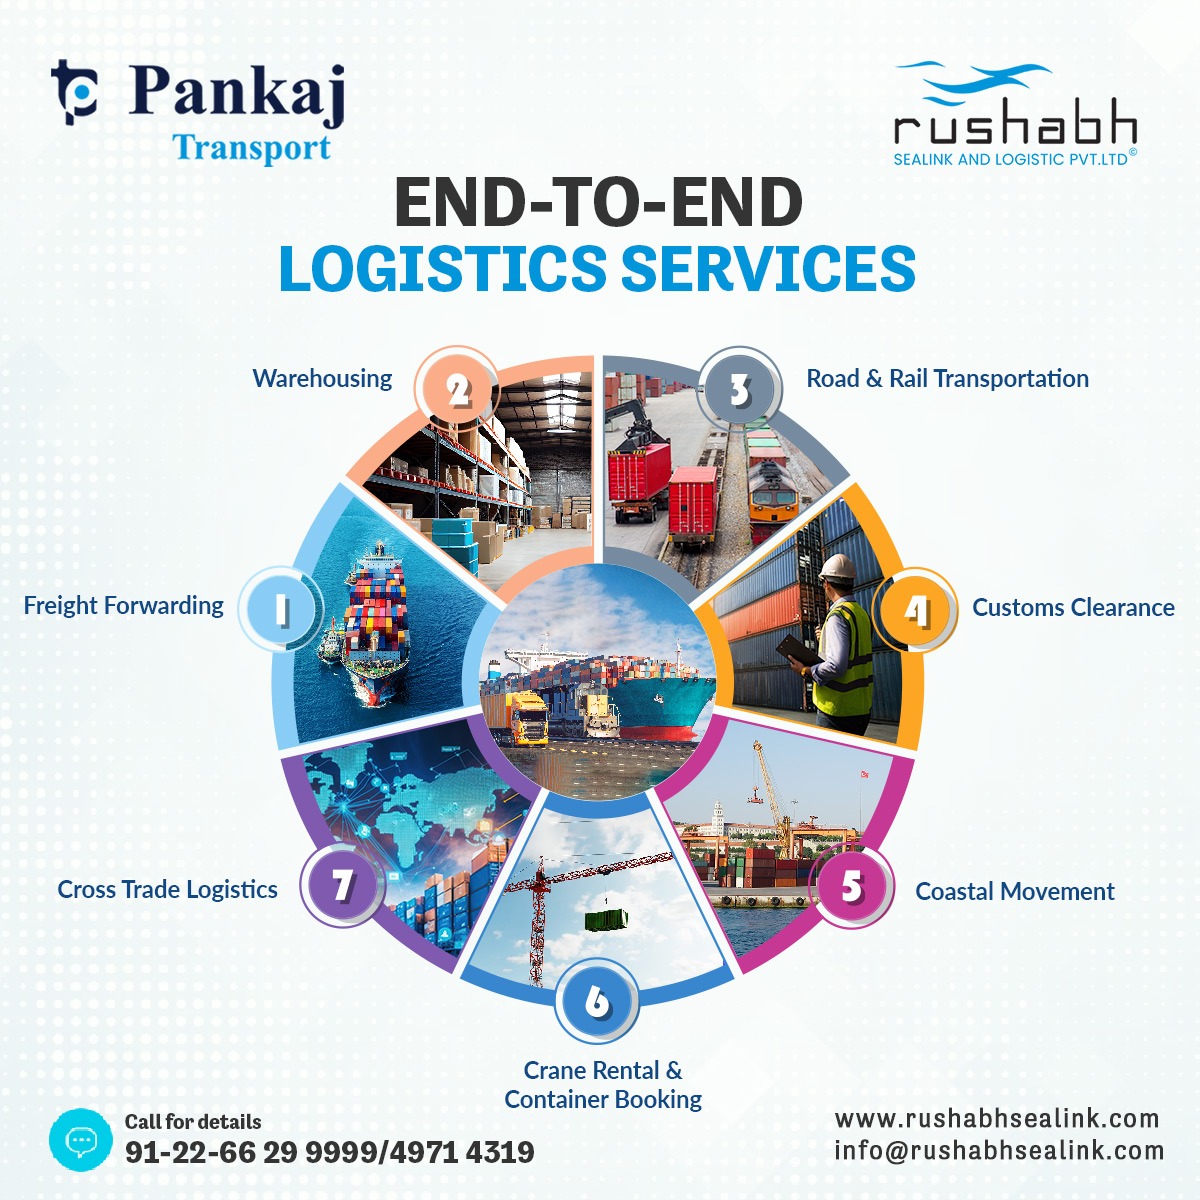 👀Looking for safe & secure🔐comprehensive #logisticssolutions🏗️? We provide end-to-end services including🏢#warehousing, #transportation🚛,and #freightmanagement🚢

📲+91-22-6629 9999
🌐rushabhsealink.com
📧info@rushabhsealink.com

#supplychain #freightforwarding #logistics